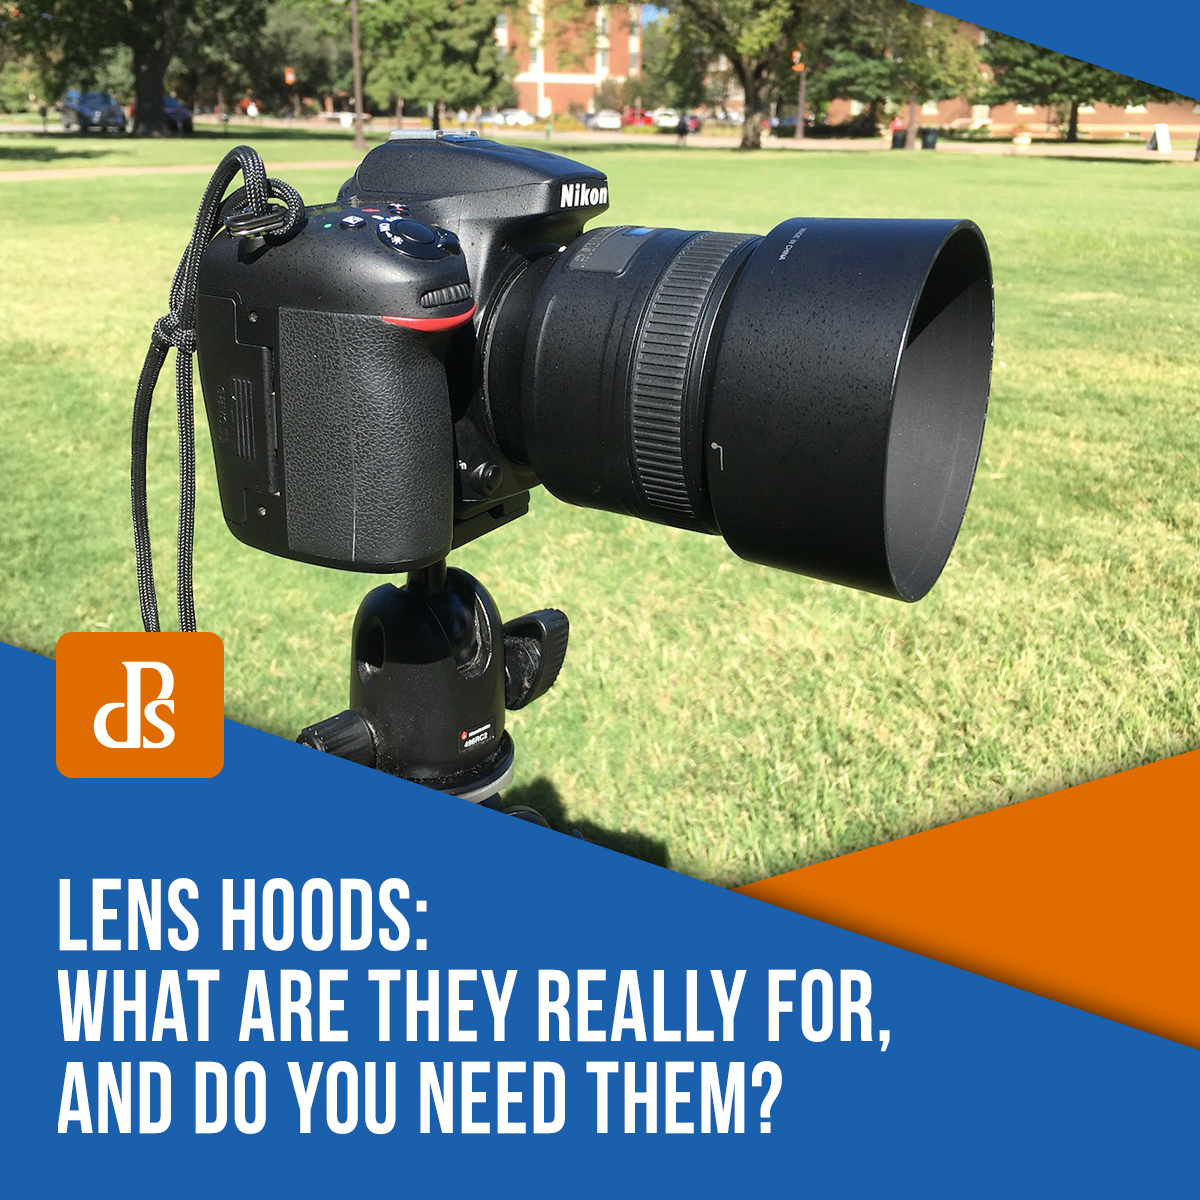 Lens Hoods What Are They Really For. and Do You Need Them?